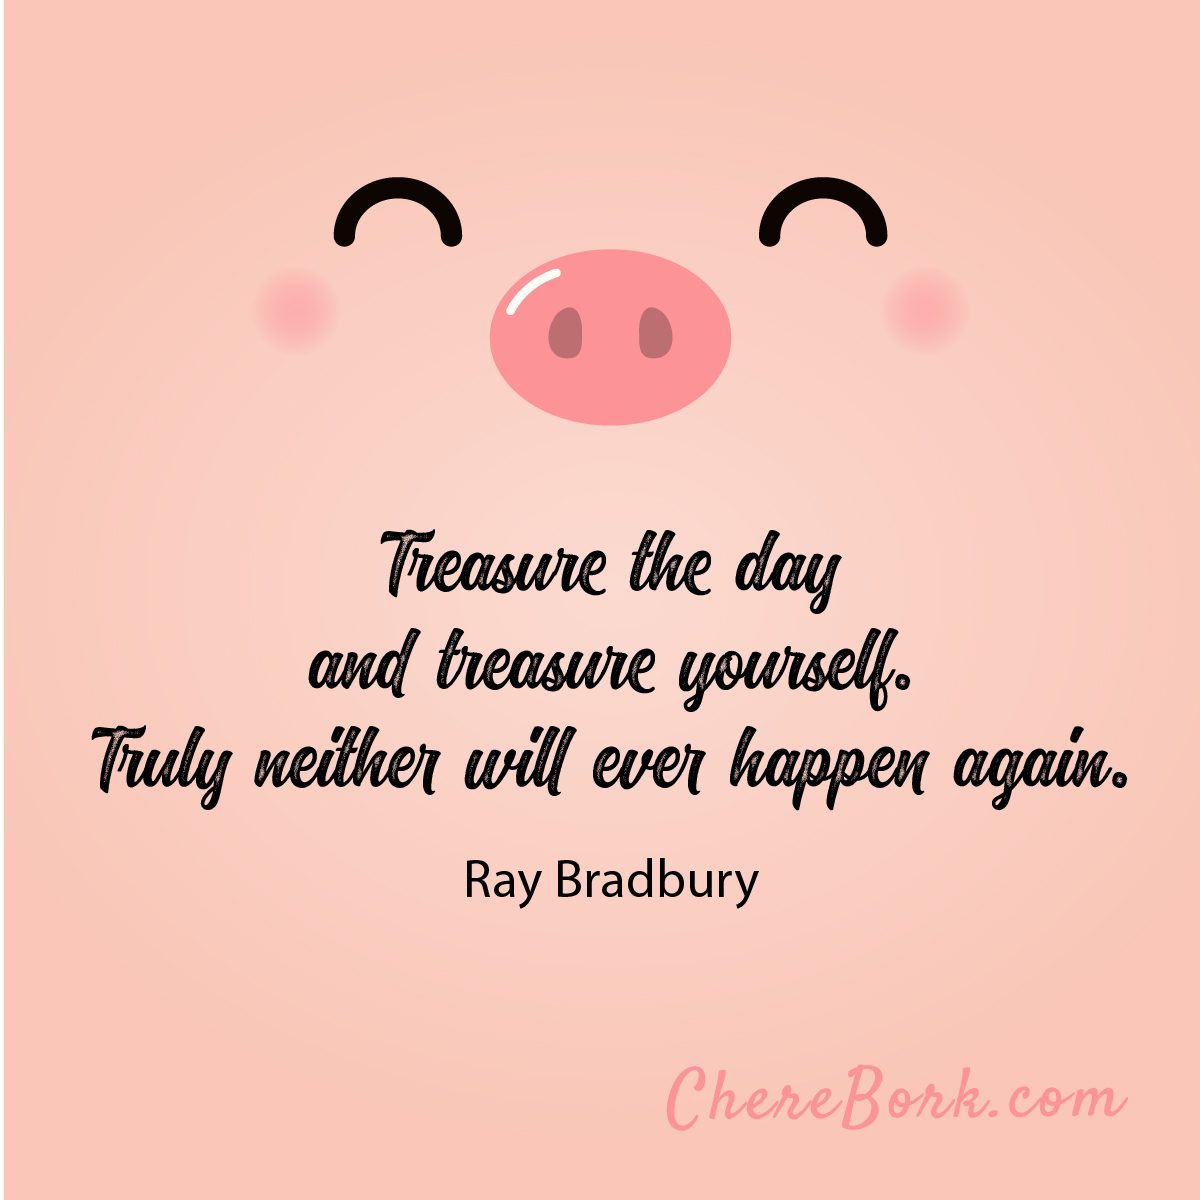 Treasure the day and treasure yourself. Truly neither will ever happen again. -Ray Bradbury